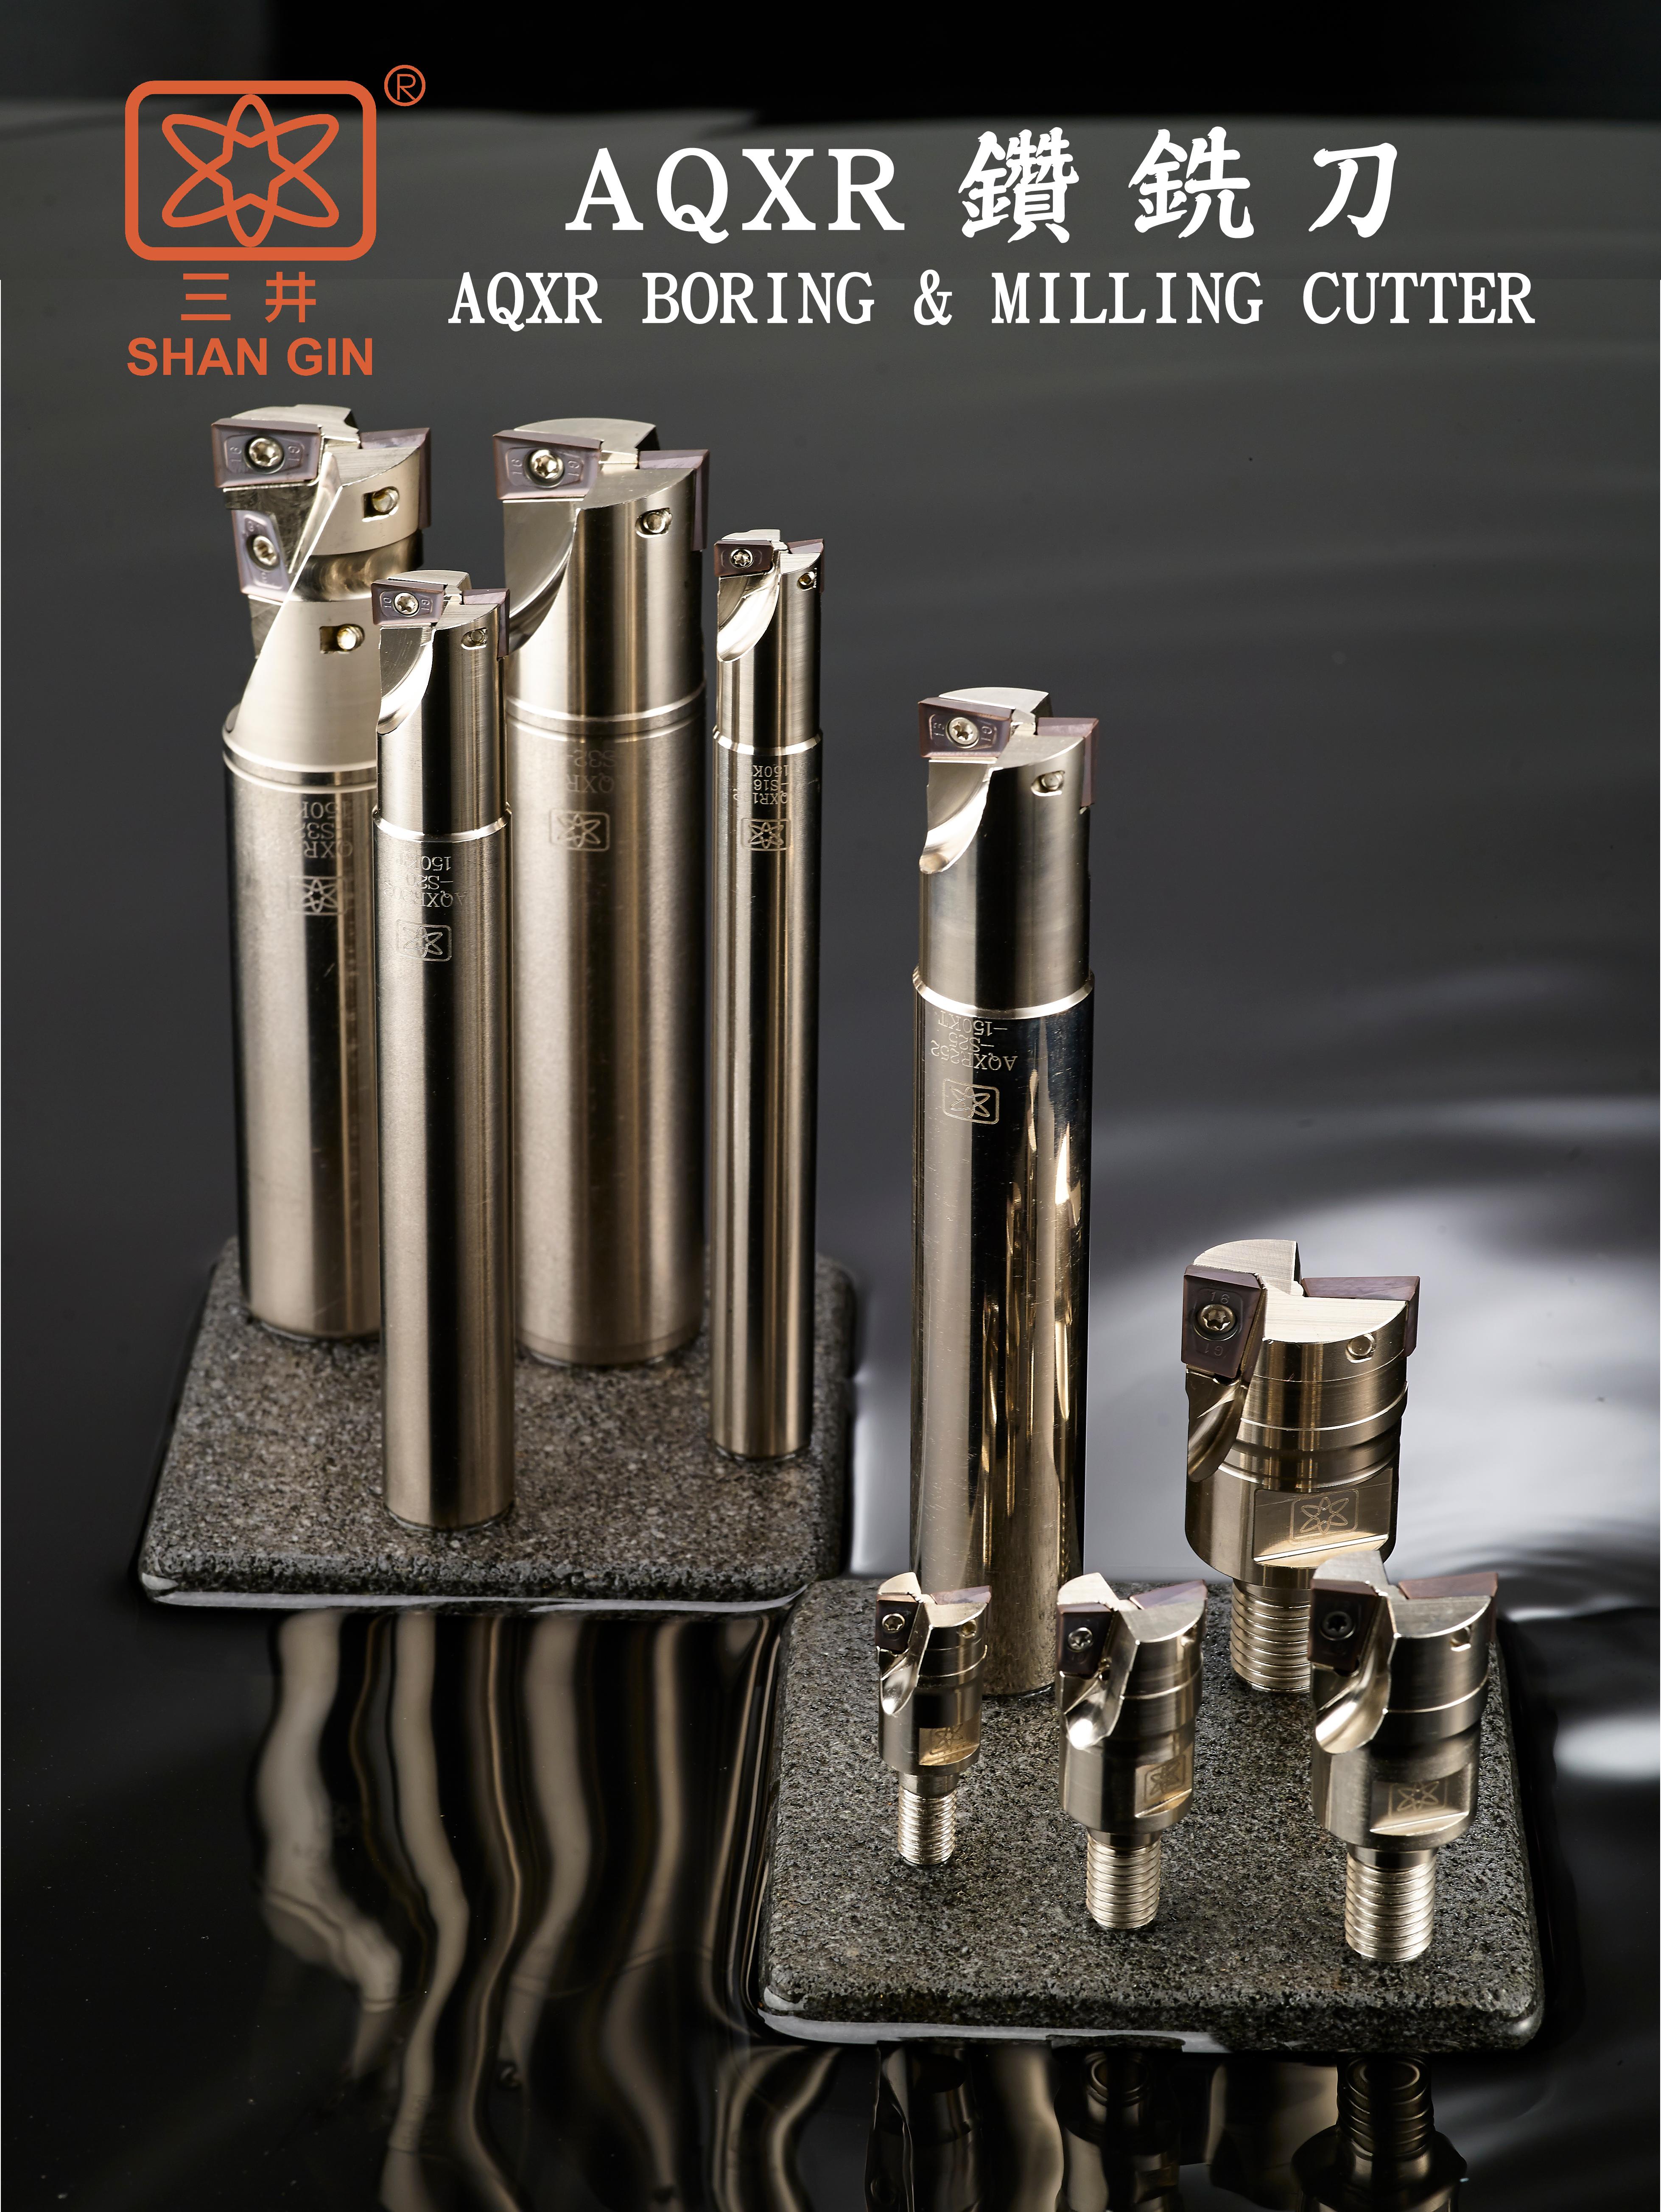 Products|AQXR BORING & MILLING CUTTER